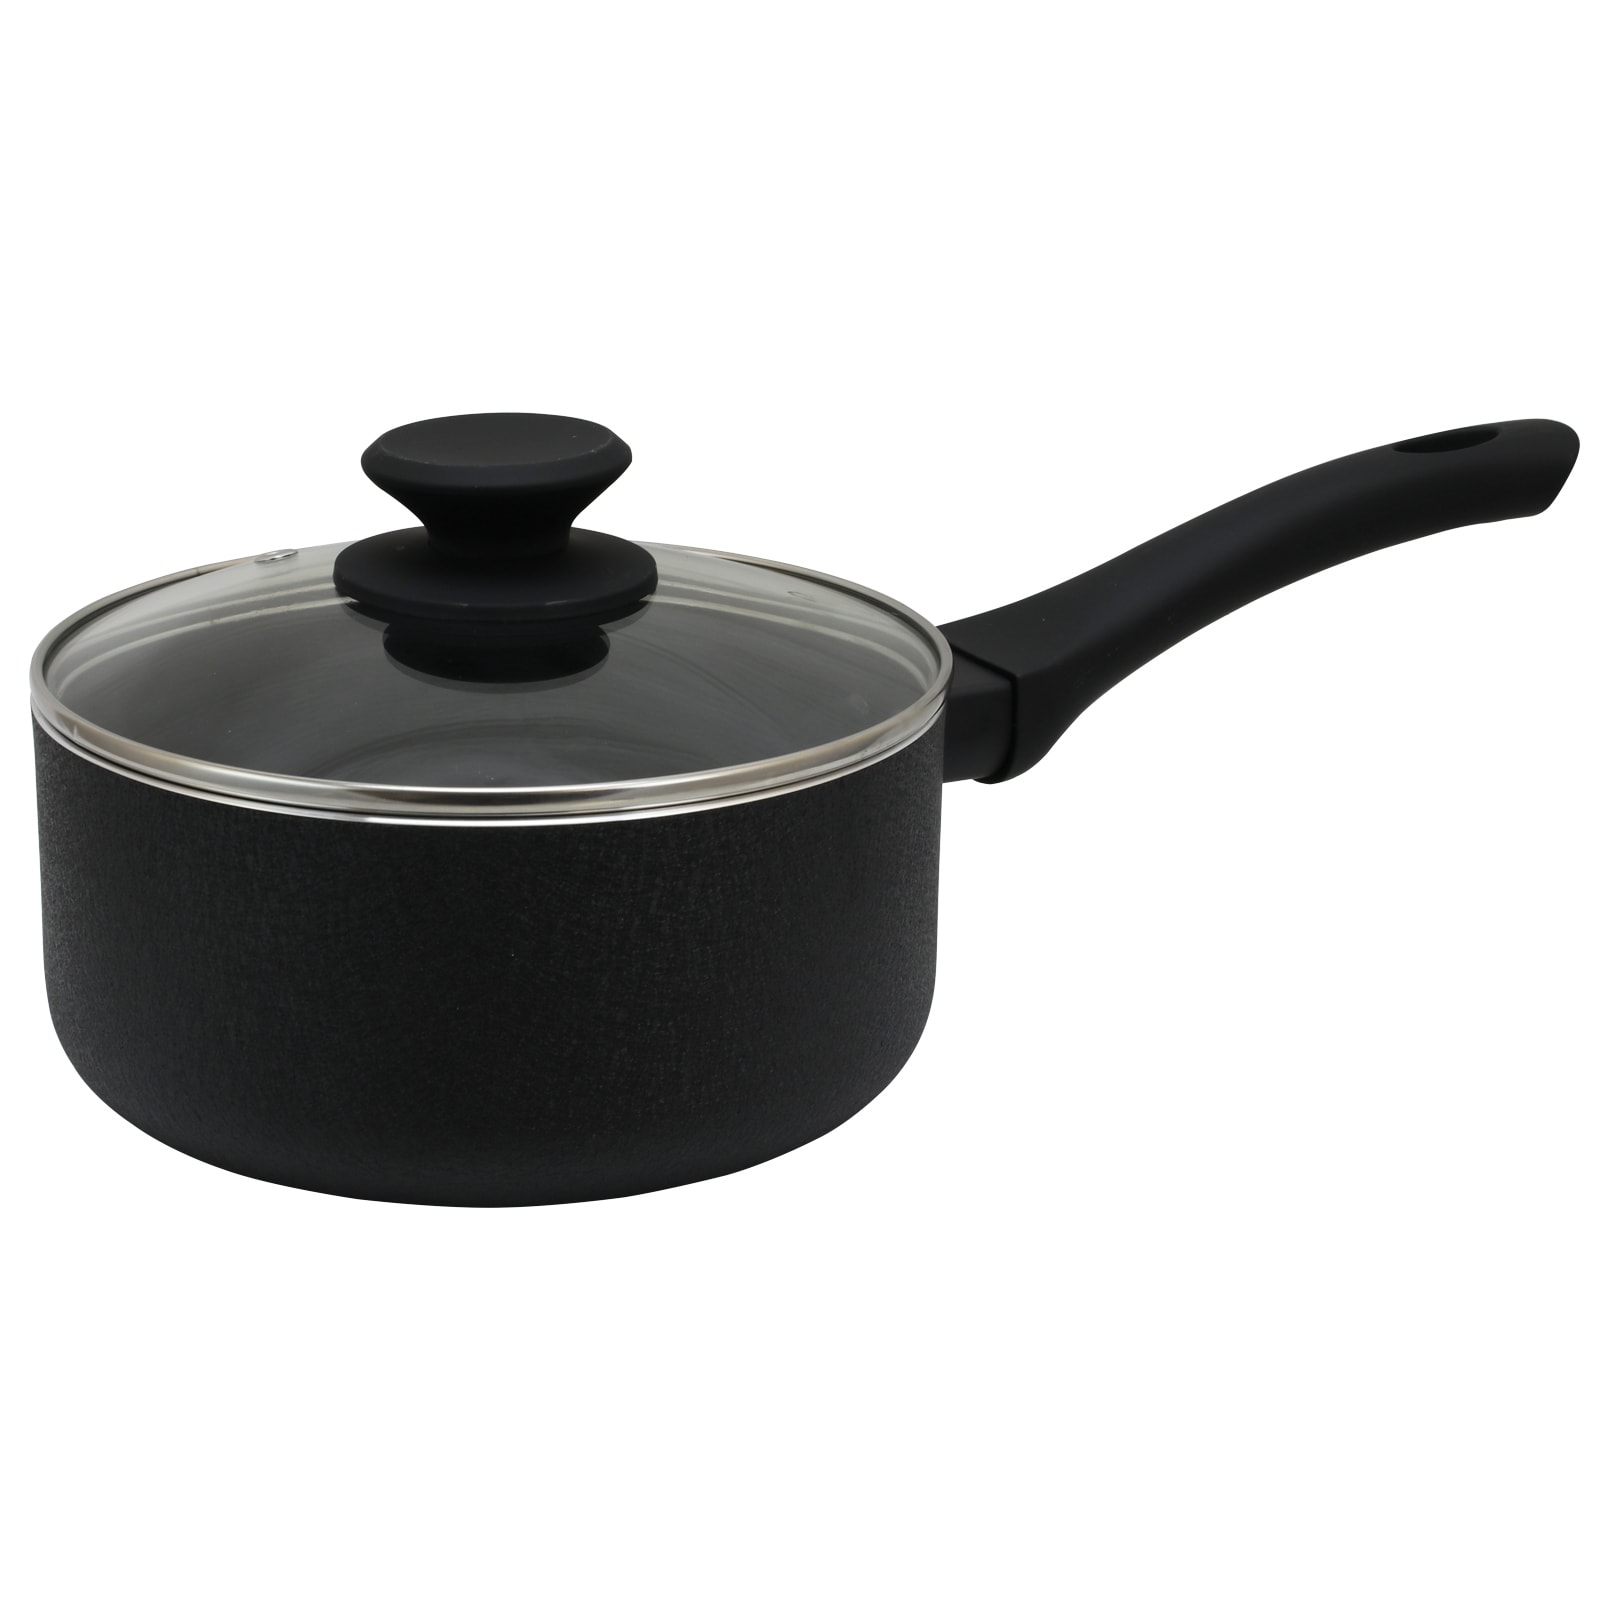 https://ak1.ostkcdn.com/images/products/is/images/direct/0a49ab8b0bb3d2f450dde03b238d3d98ed4fe511/Oster-Ashford-2-Quart-Aluminum-Nonstick-Sauce-Pan-with-Tempered-Glass-Lid-in-Black.jpg